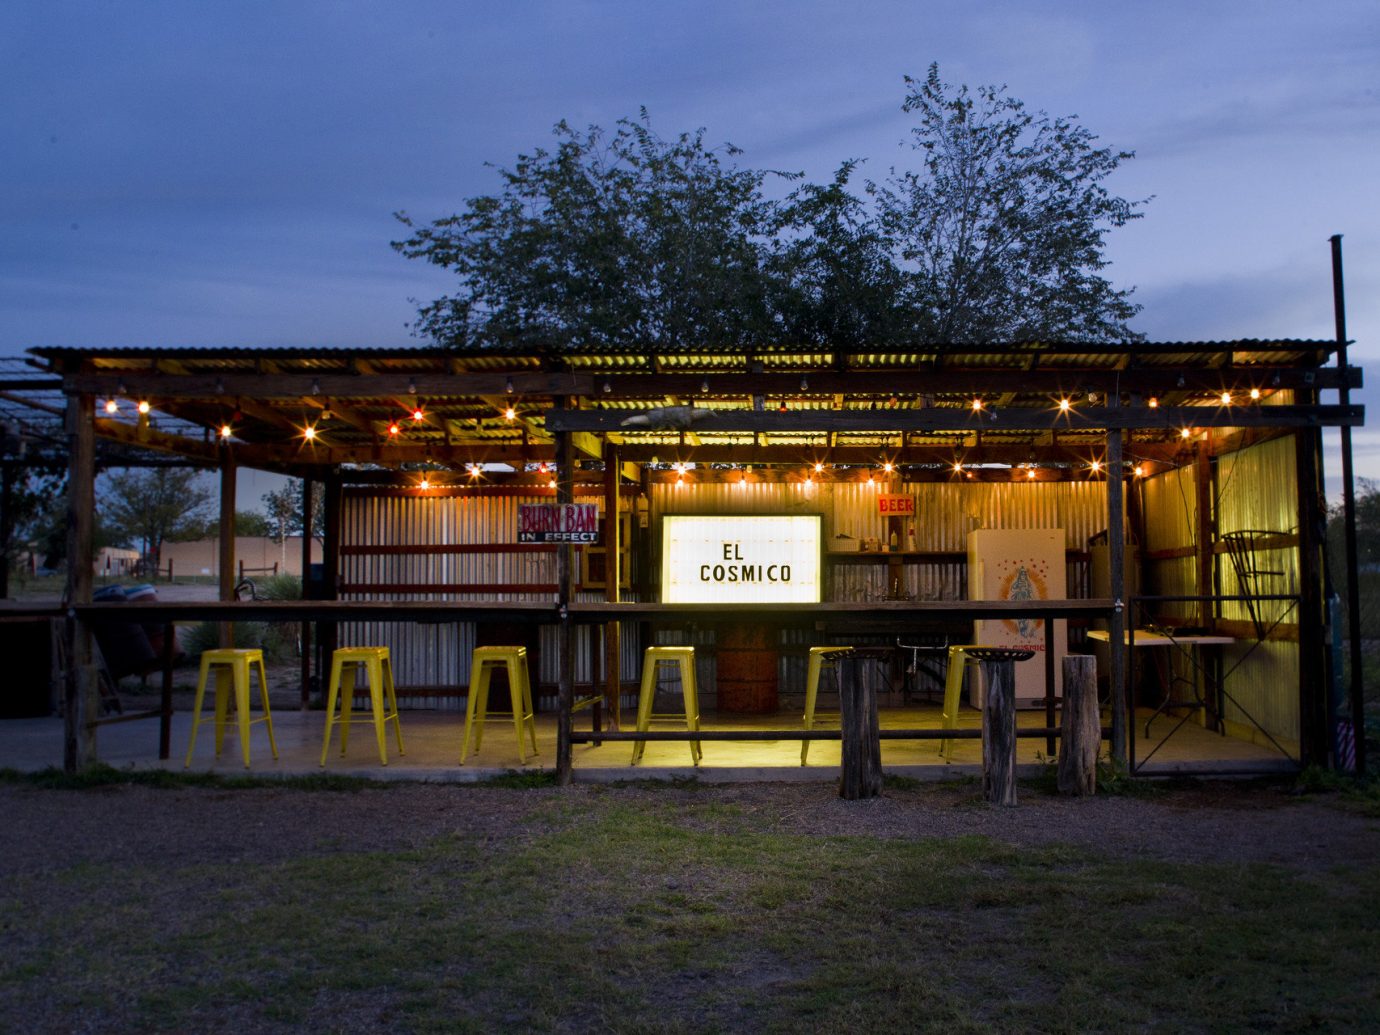 artistic artsy Bar bar seating dusk Glamping Hip isolation lights Nature night lights Night Sky Nightlife outdoor bar Outdoors Outdoors + Adventure quirky remote Rustic trees trendy Weekend Getaways outdoor sky grass night evening home sign